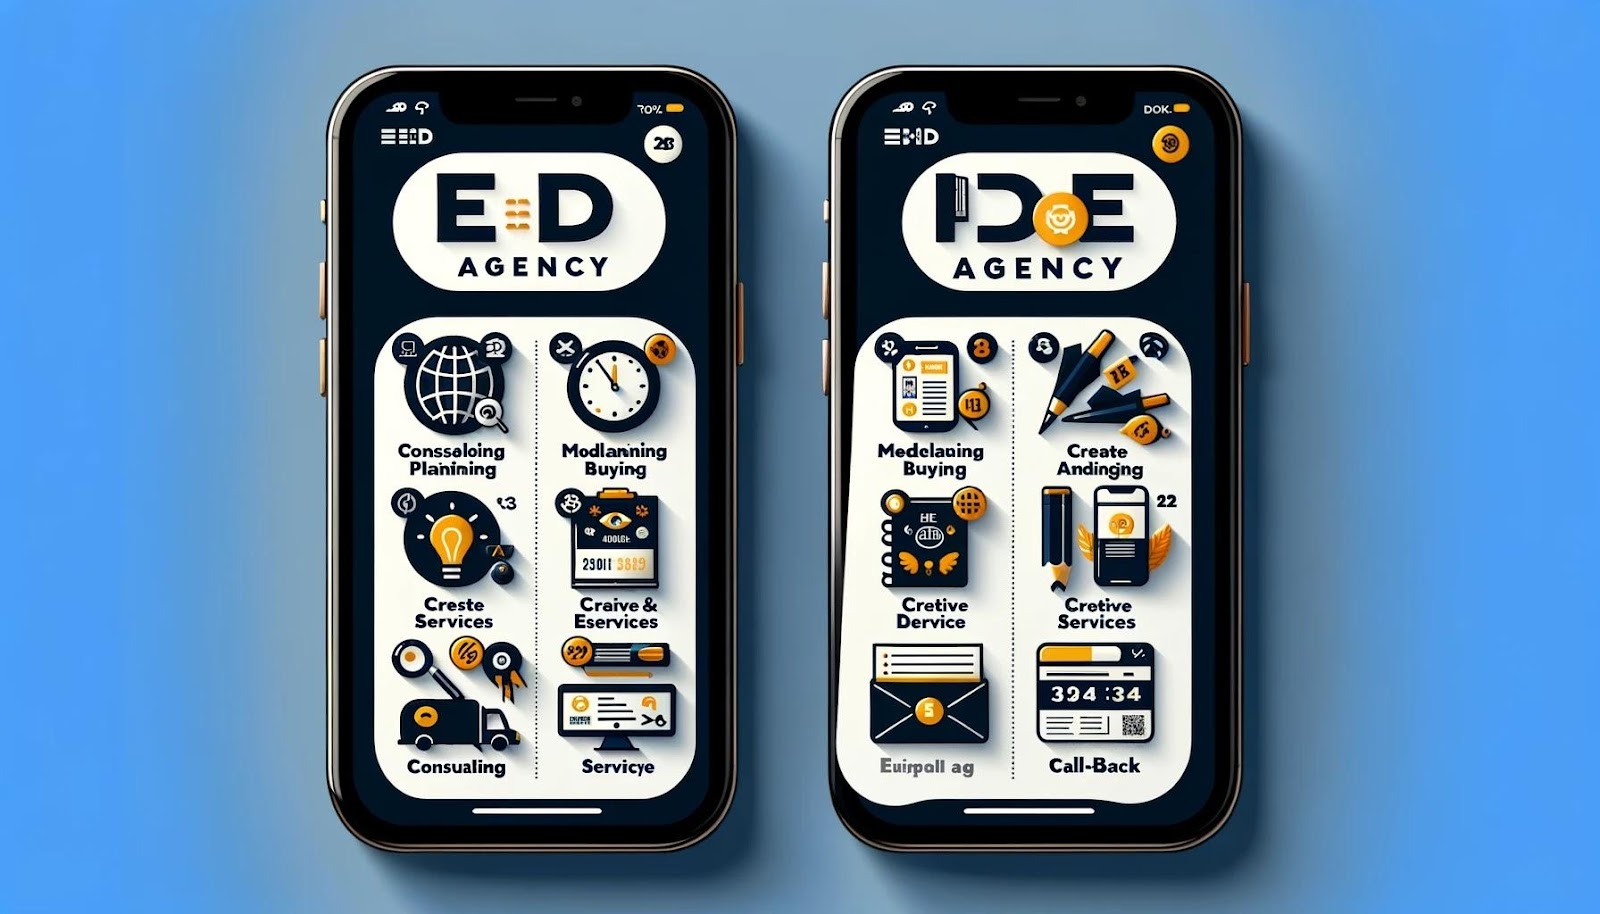 A widescreen iPhone-style image representing 'EdMarketing Agency', a full-service marketing consultancy for the educational sector. The image should encapsulate their services: consulting, media planning and buying, and creative services such as graphic and web design. No specific client details are shown, but elements should hint at the range and scale of projects undertaken. The design includes a section for contact information, suggesting professionalism and availability for inquiries or call backs. The style is clean, modern, and concise, fitting for a professional service provider.